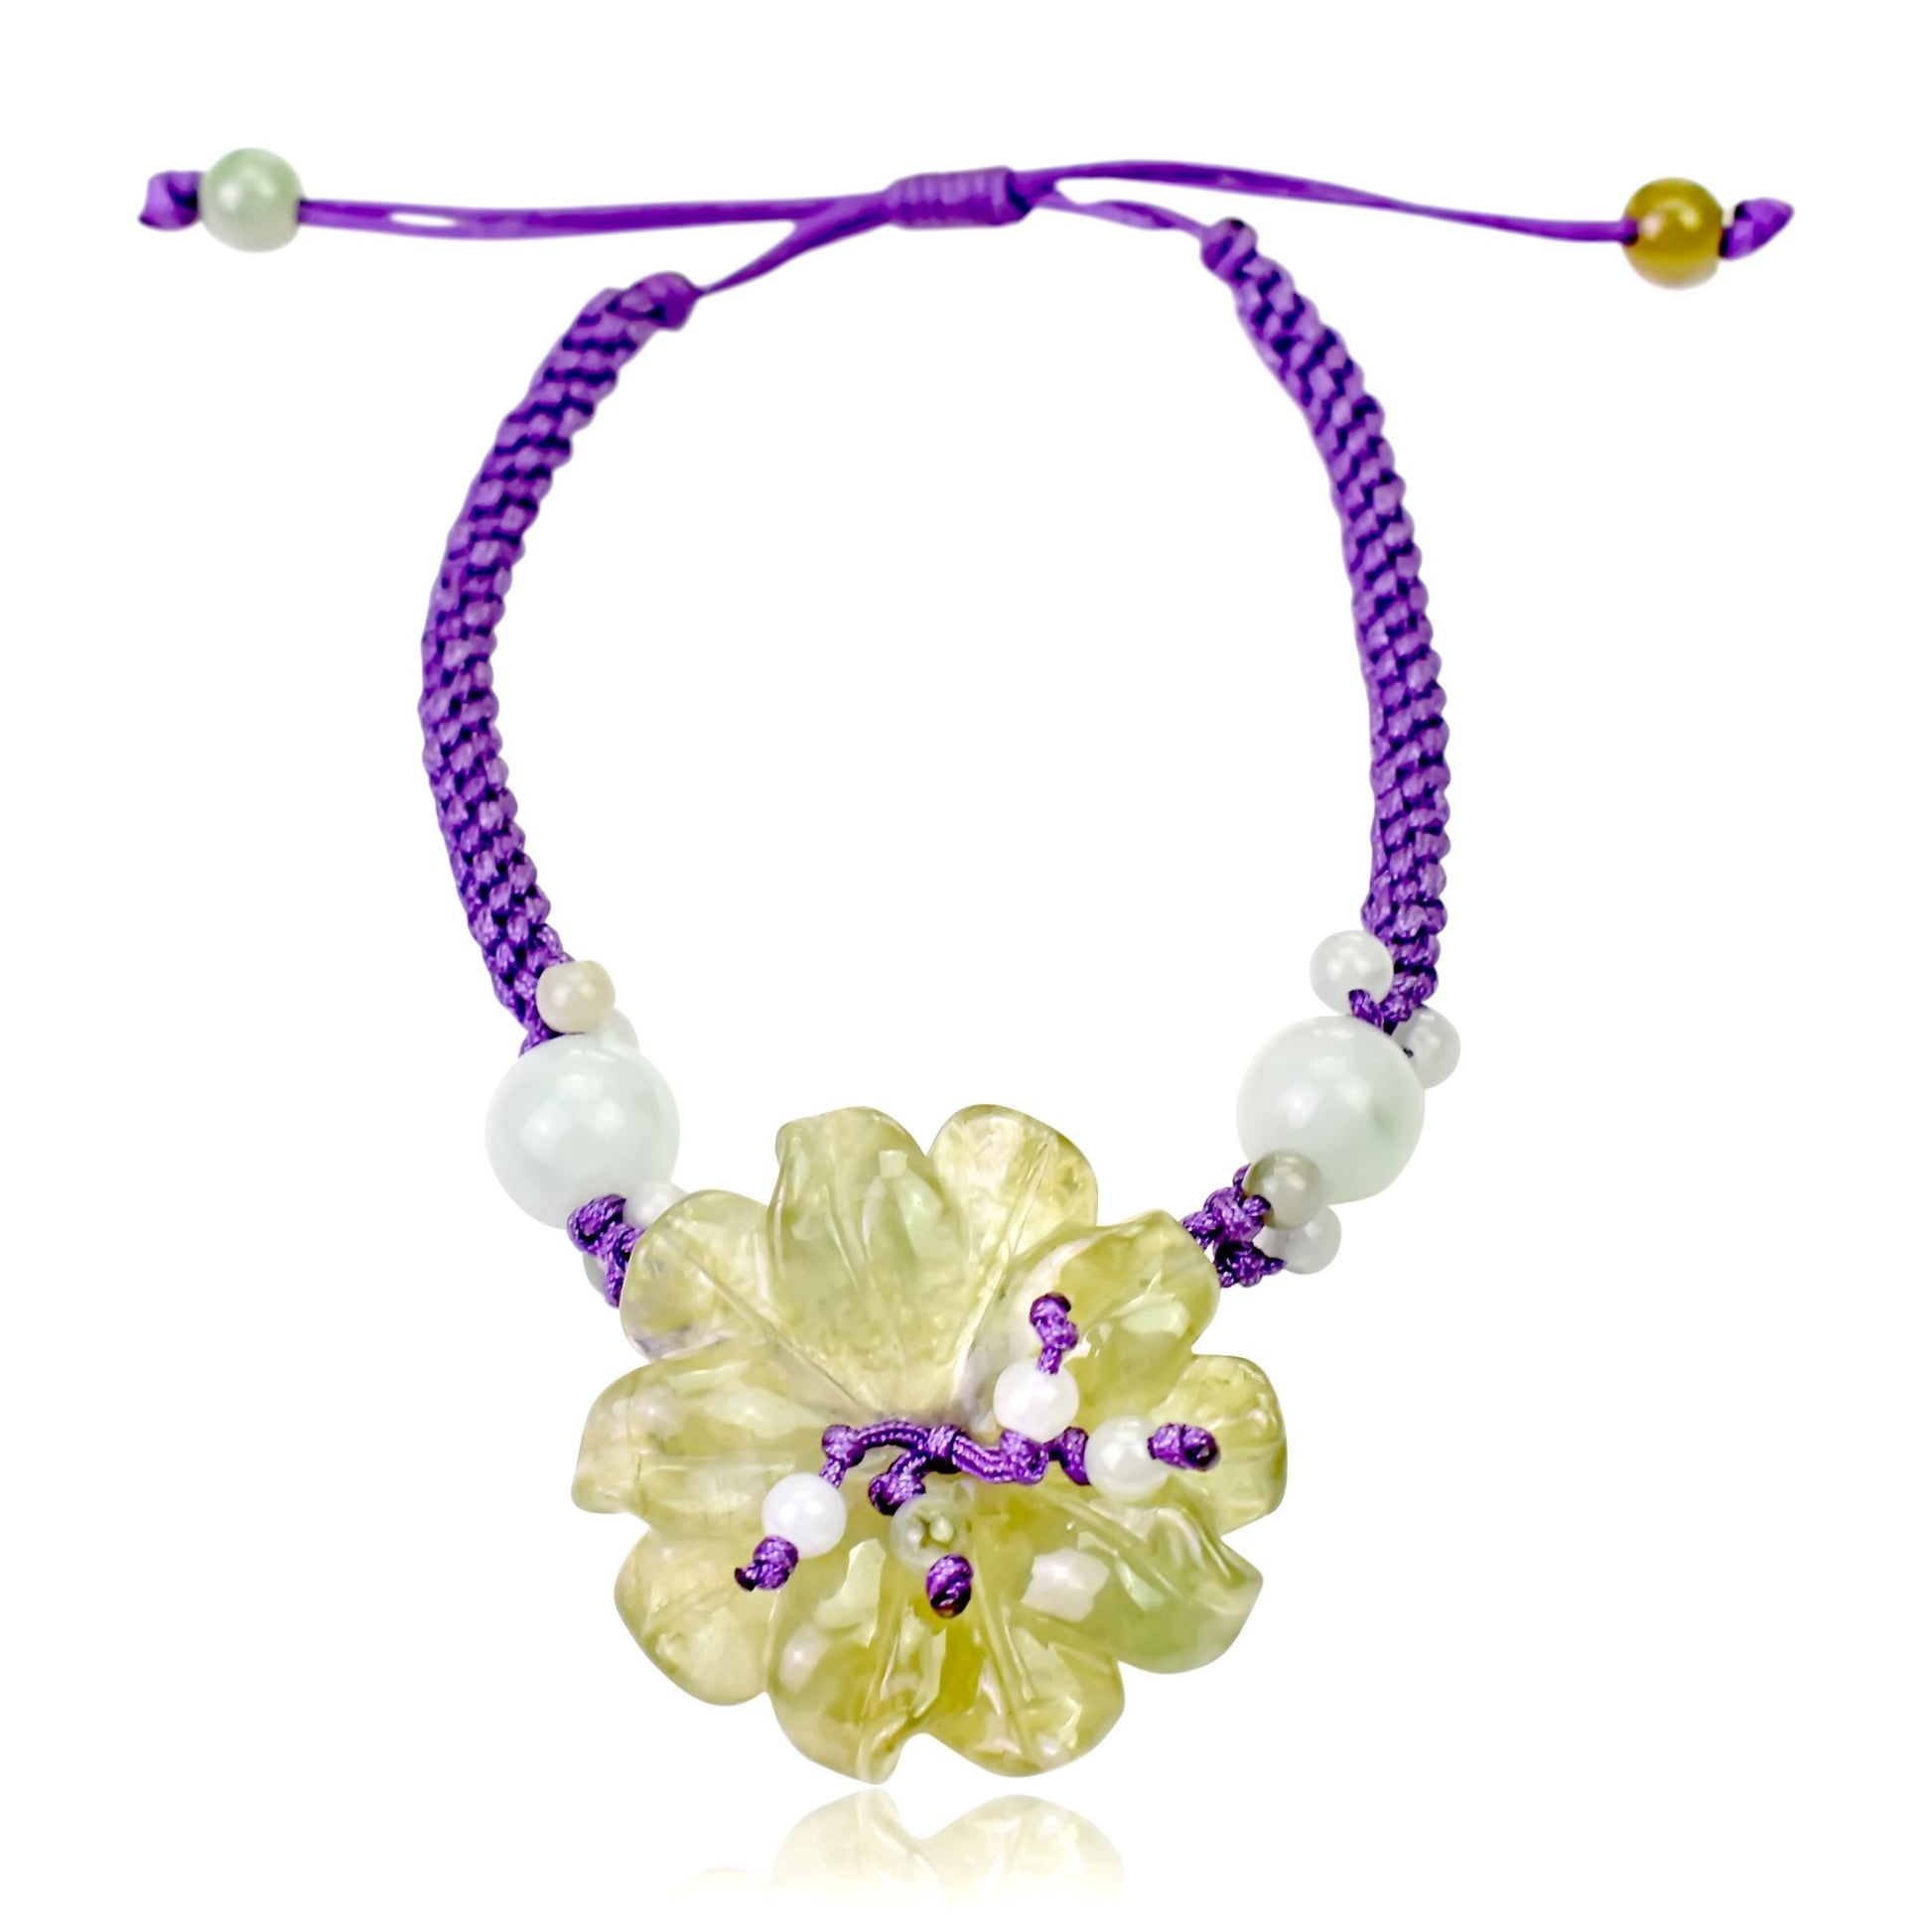 Add Sparkle to Your Outfits with the Anemone Flower Bracelet made with Purple Cord